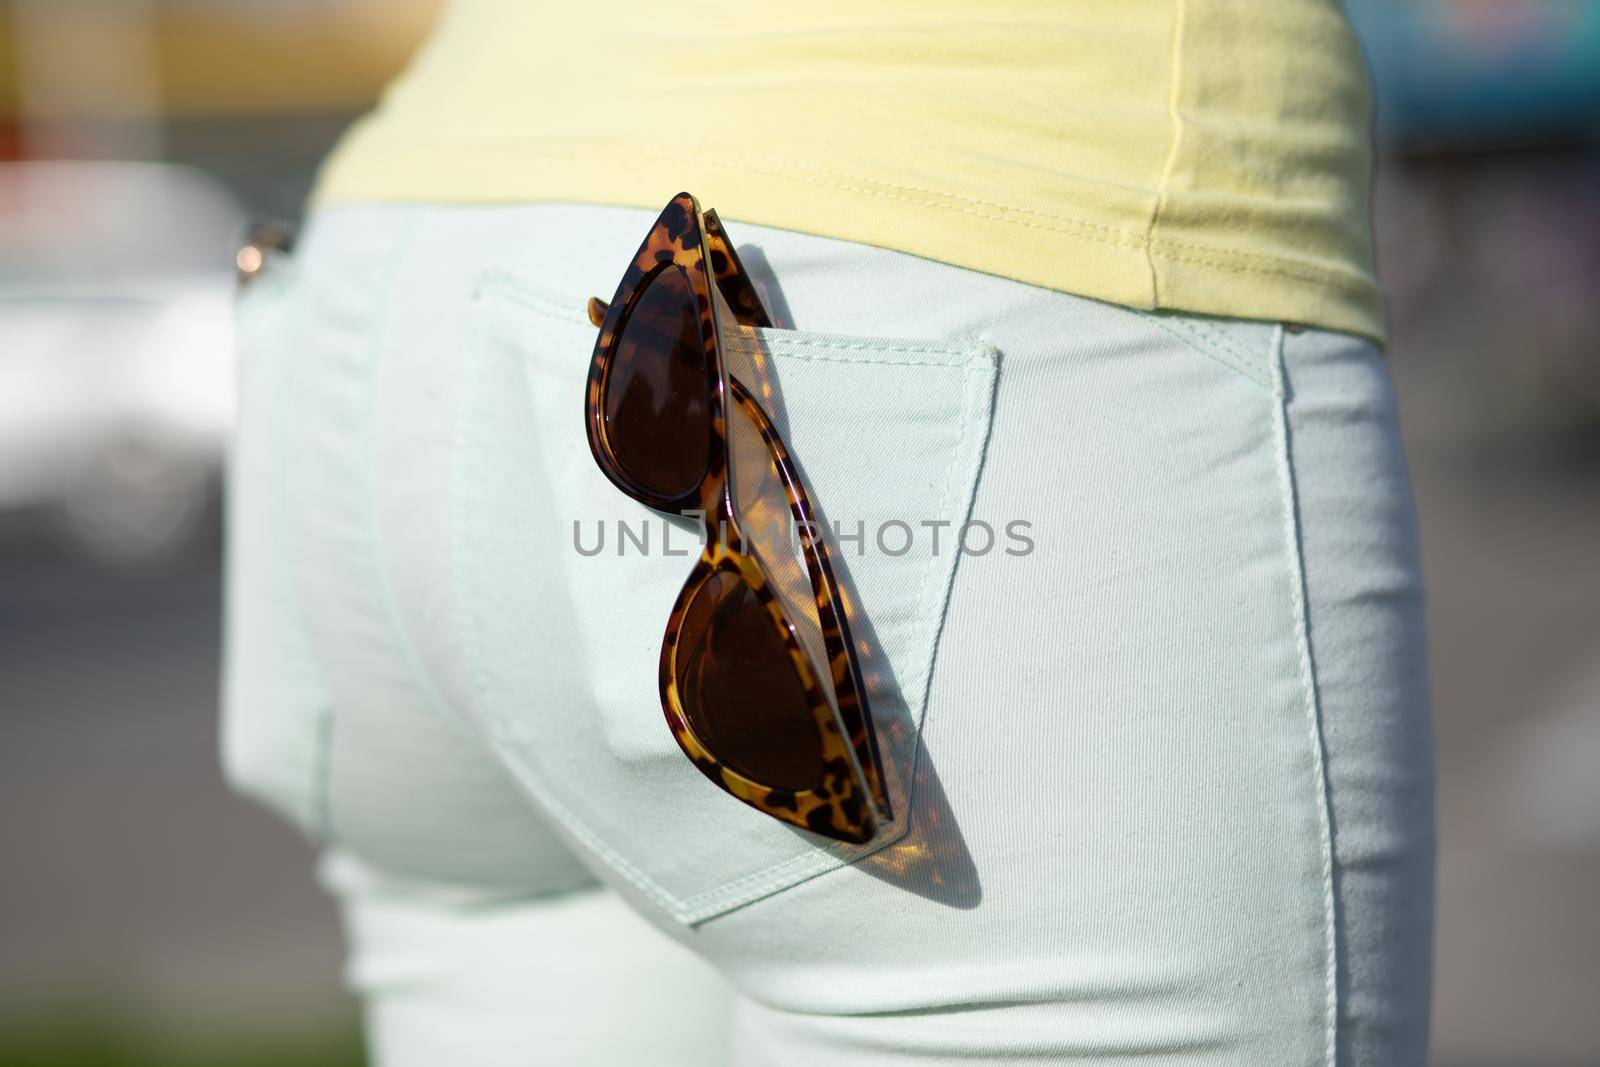 Fashionable Retro style cat-eye Sunglasses in the back pocket of female jeans